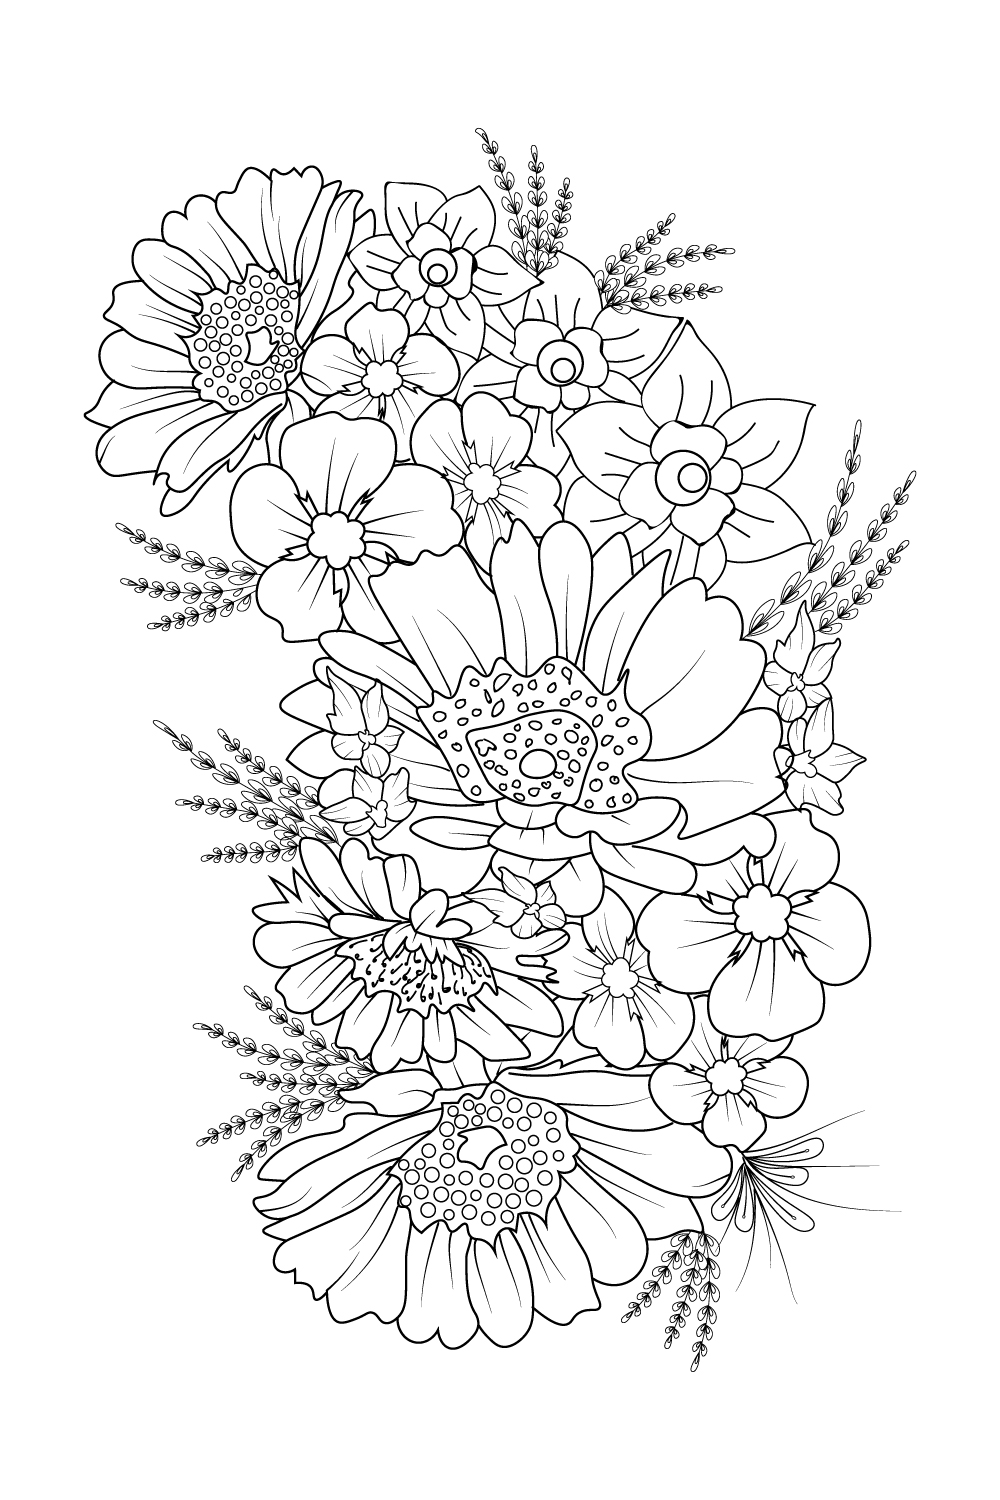 Aesthetic flower doodles, aesthetic flower doodles transparent background, aesthetic flower doodle simple, flower doodle art, flower doodle zentangle art, flower doodle zentangle art tattoos pinterest preview image.